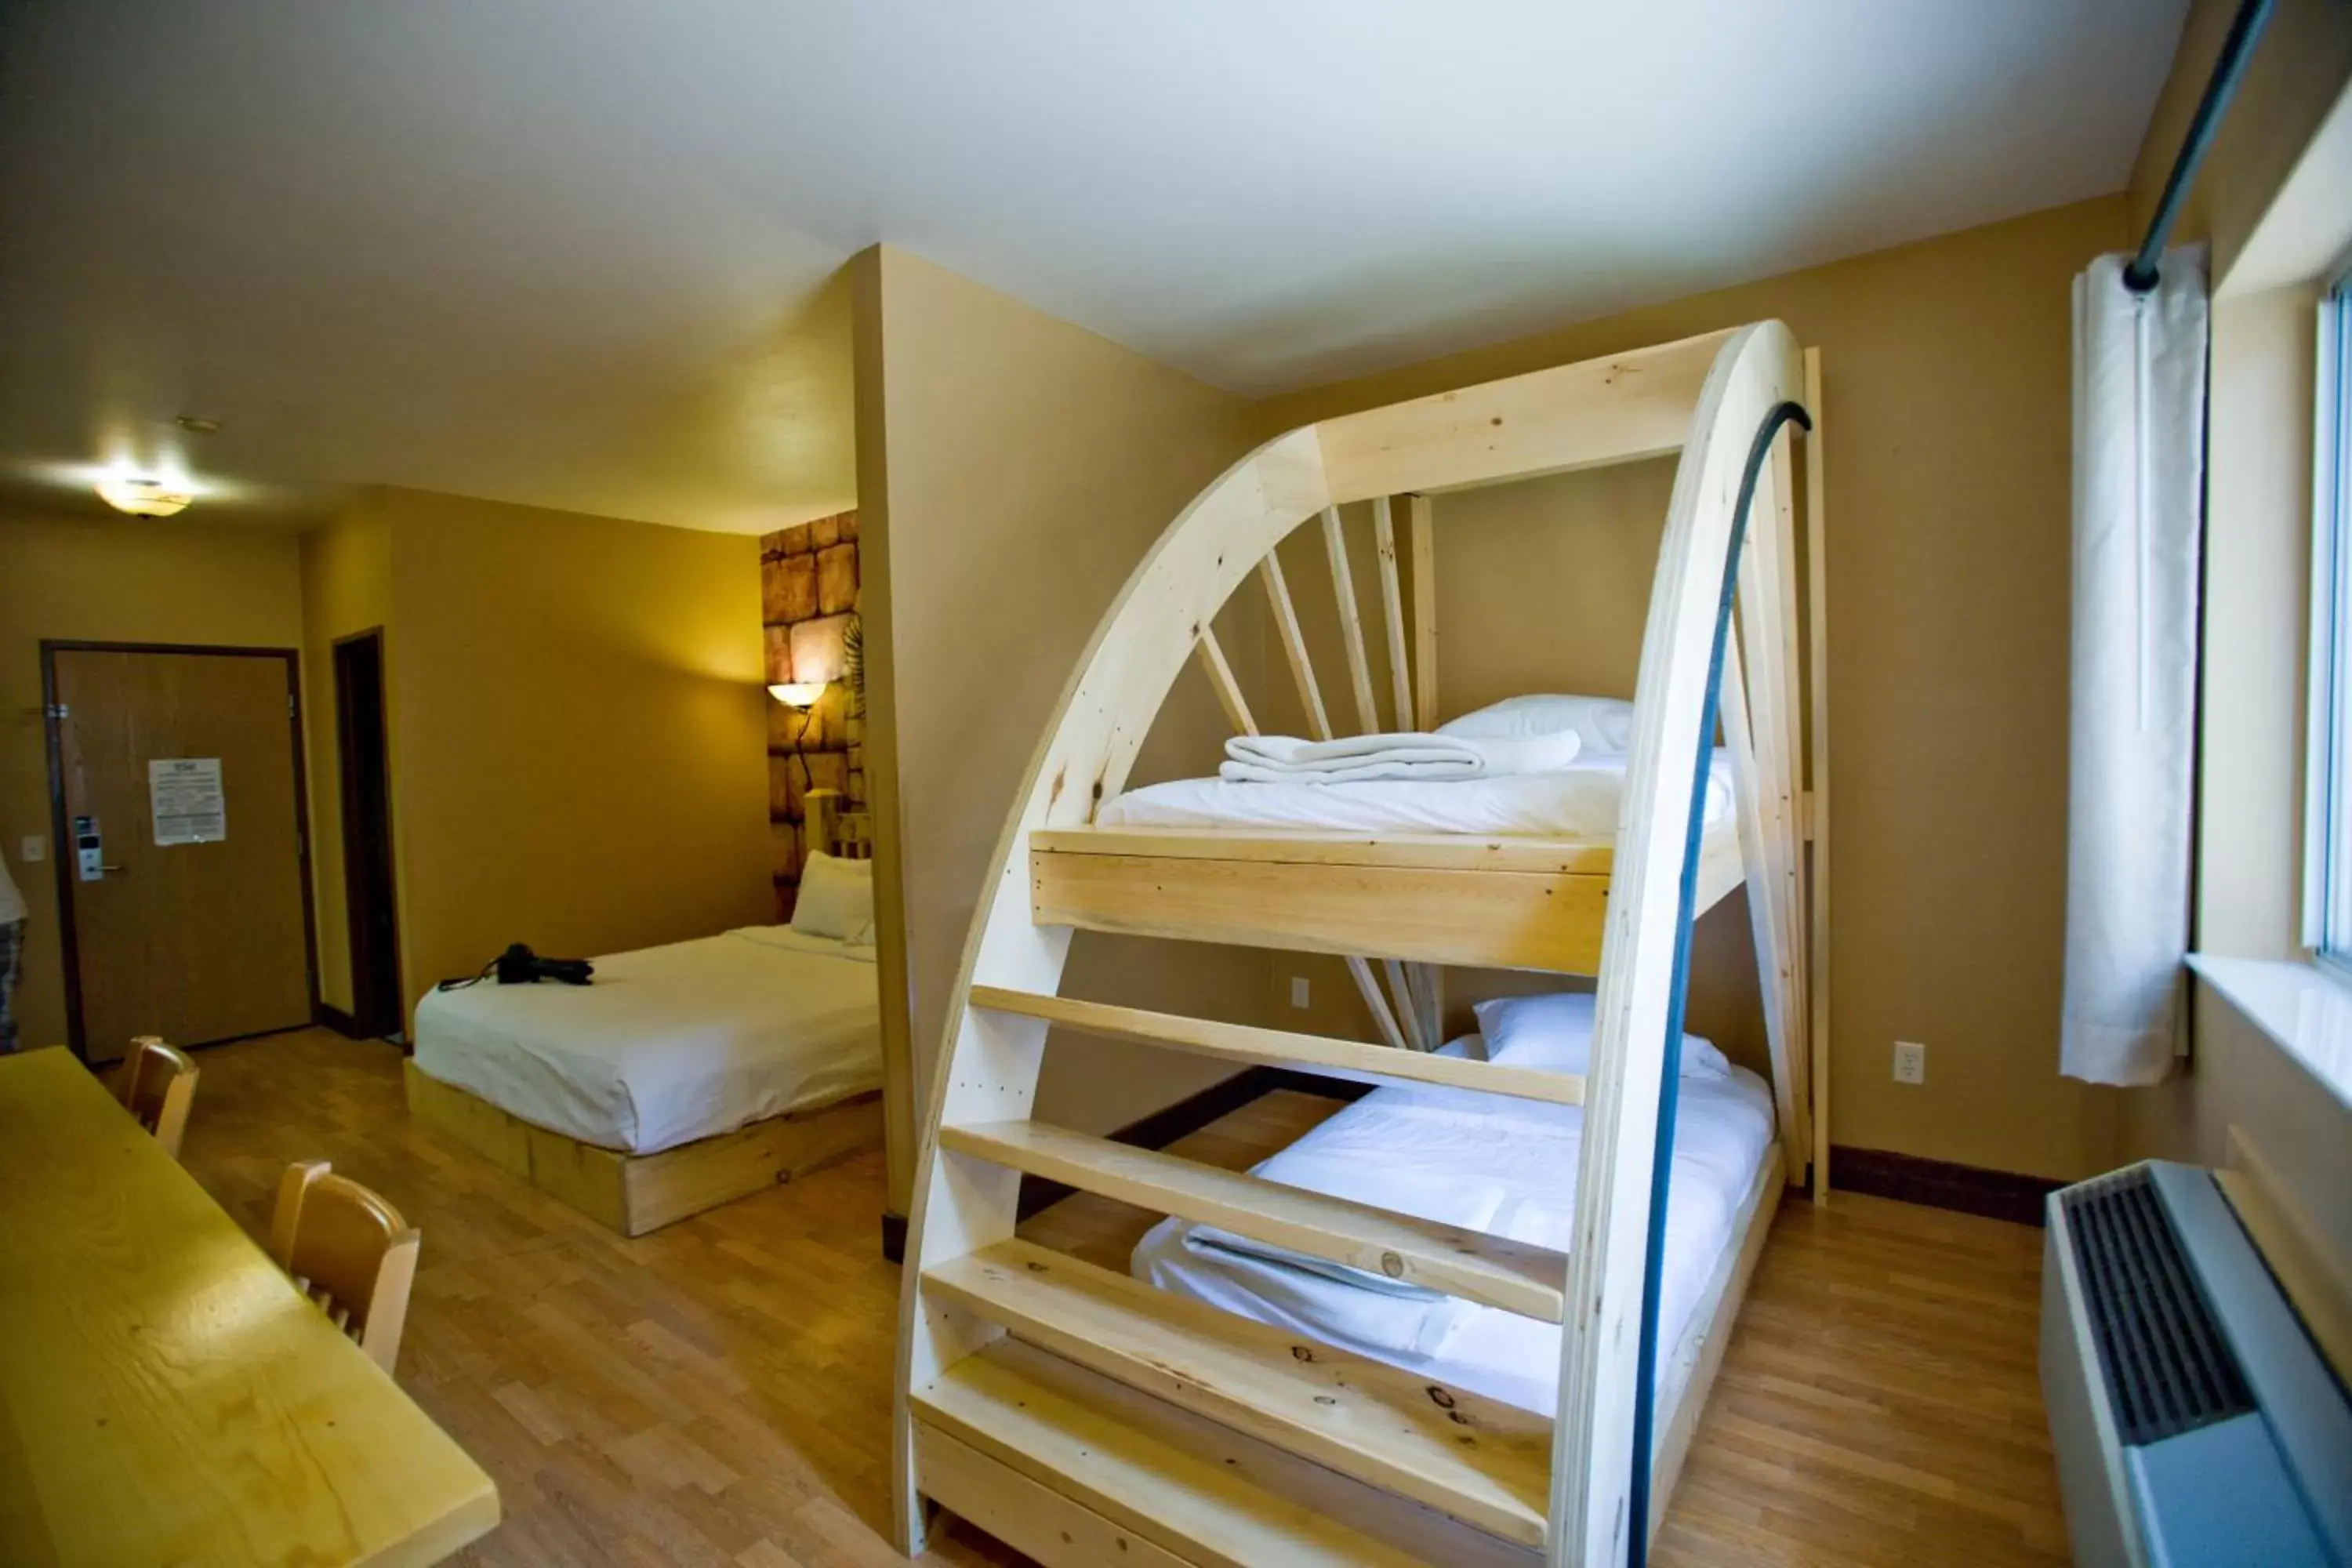 Bunk Bed in MT. OLYMPUS WATER PARK AND THEME PARK RESORT